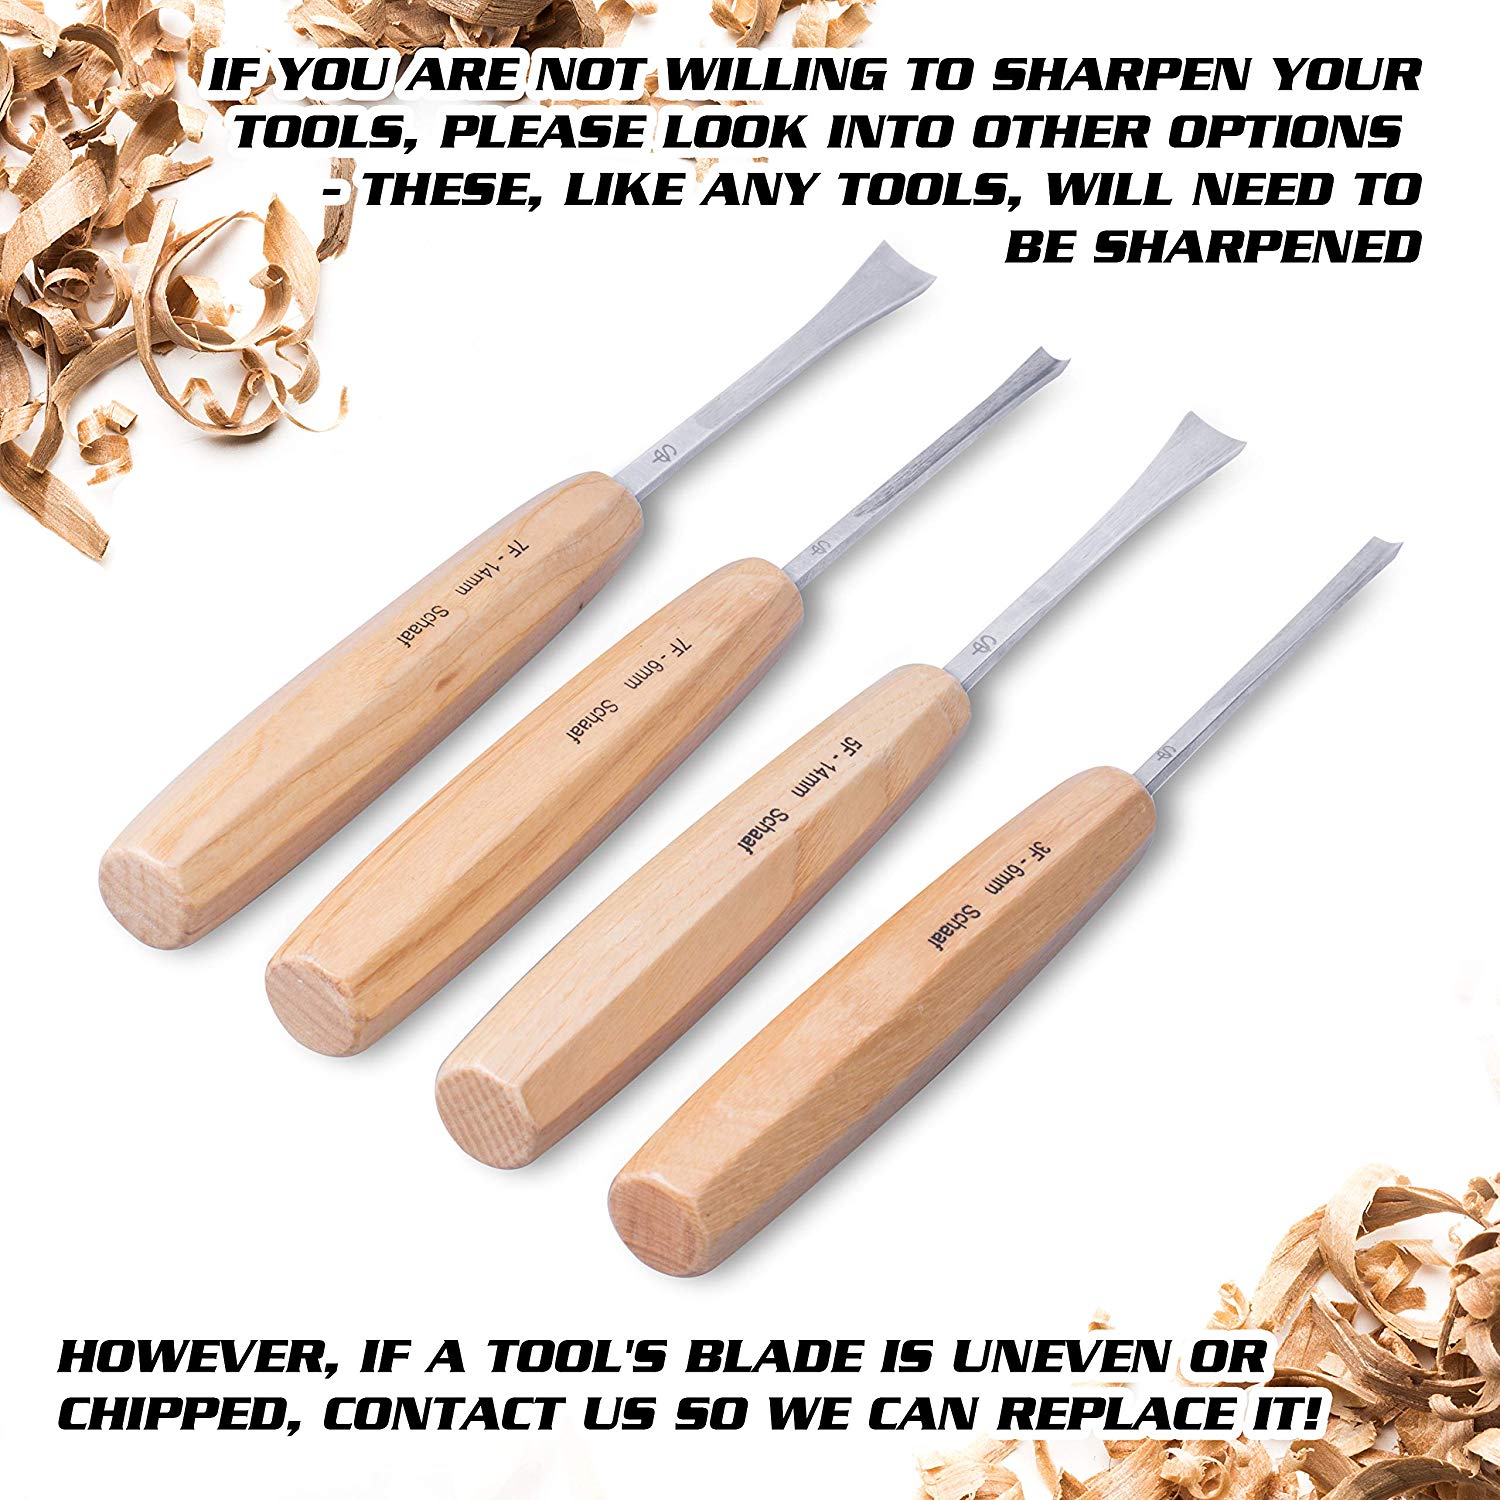 Schaaf Wood Carving Tools Schaaf Full Size Wood Carving Tools, Set of 7 | for Beginners, Hobbyists and Professionals | Canvas Case Included